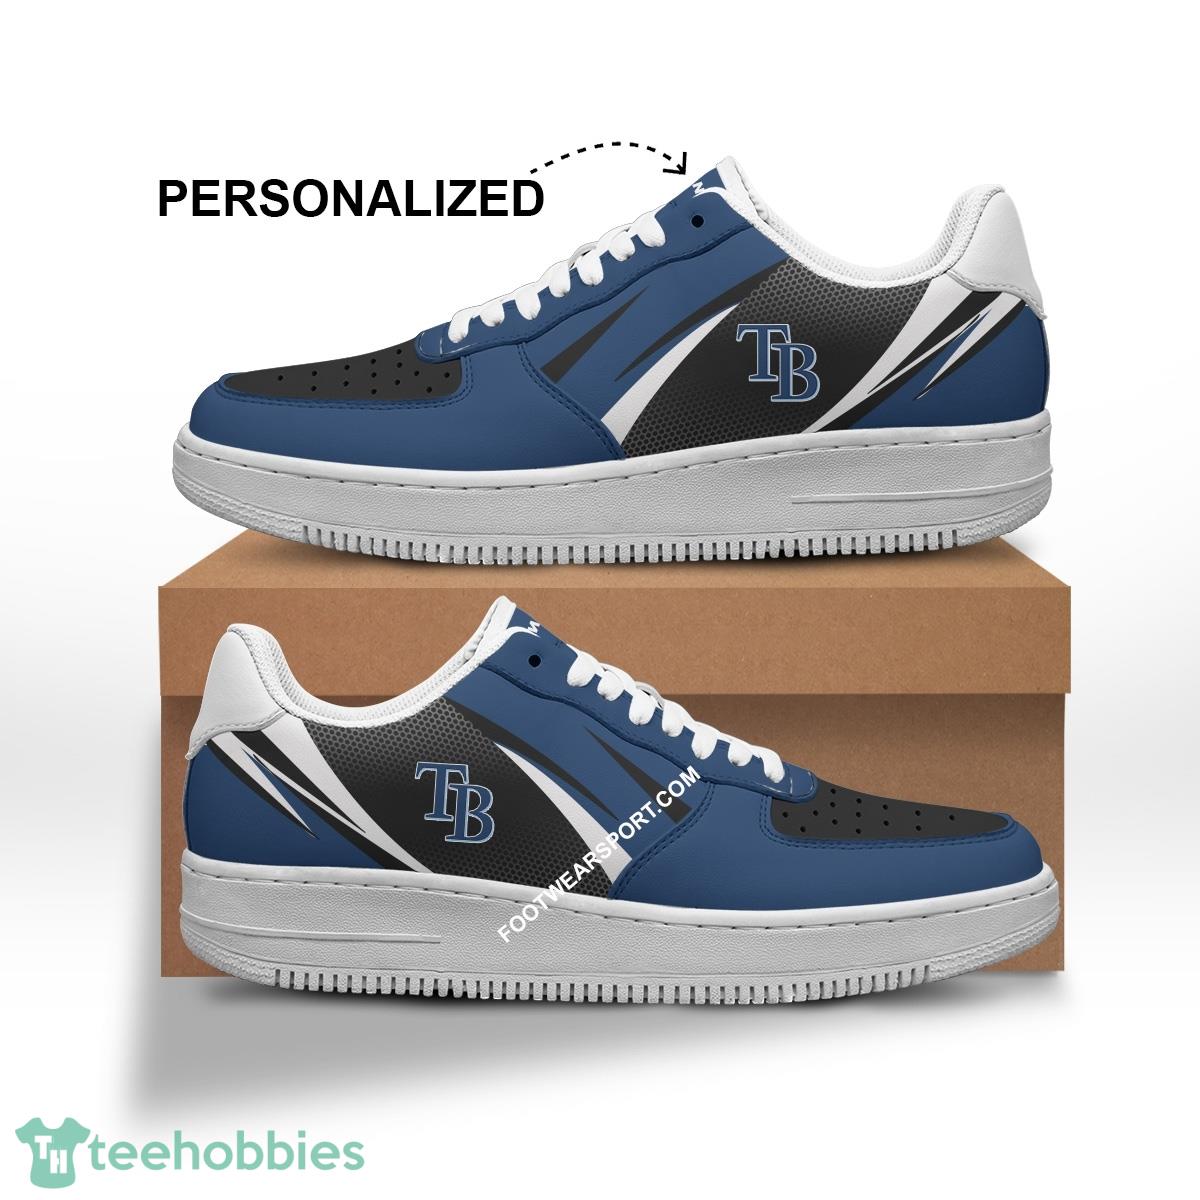 Custom Name Tampa Bay Rays Air Force 1 Shoes Trending Design For Fans Gift - MLB Tampa Bay Rays Air Force 1 Shoes Personalized Style 1